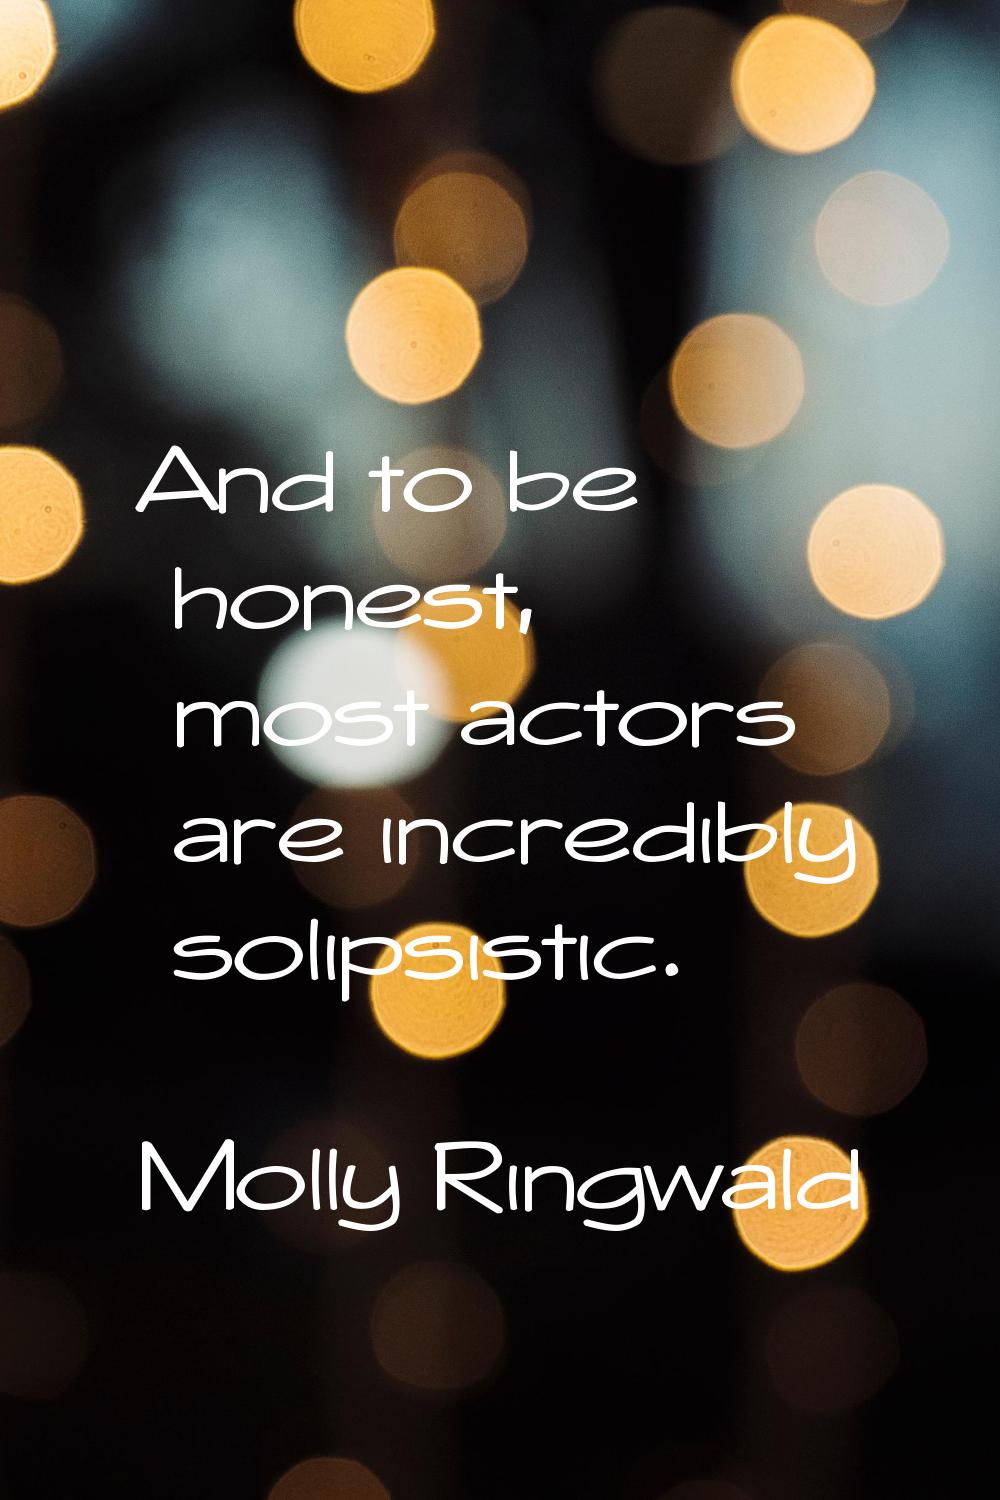 And to be honest, most actors are incredibly solipsistic.